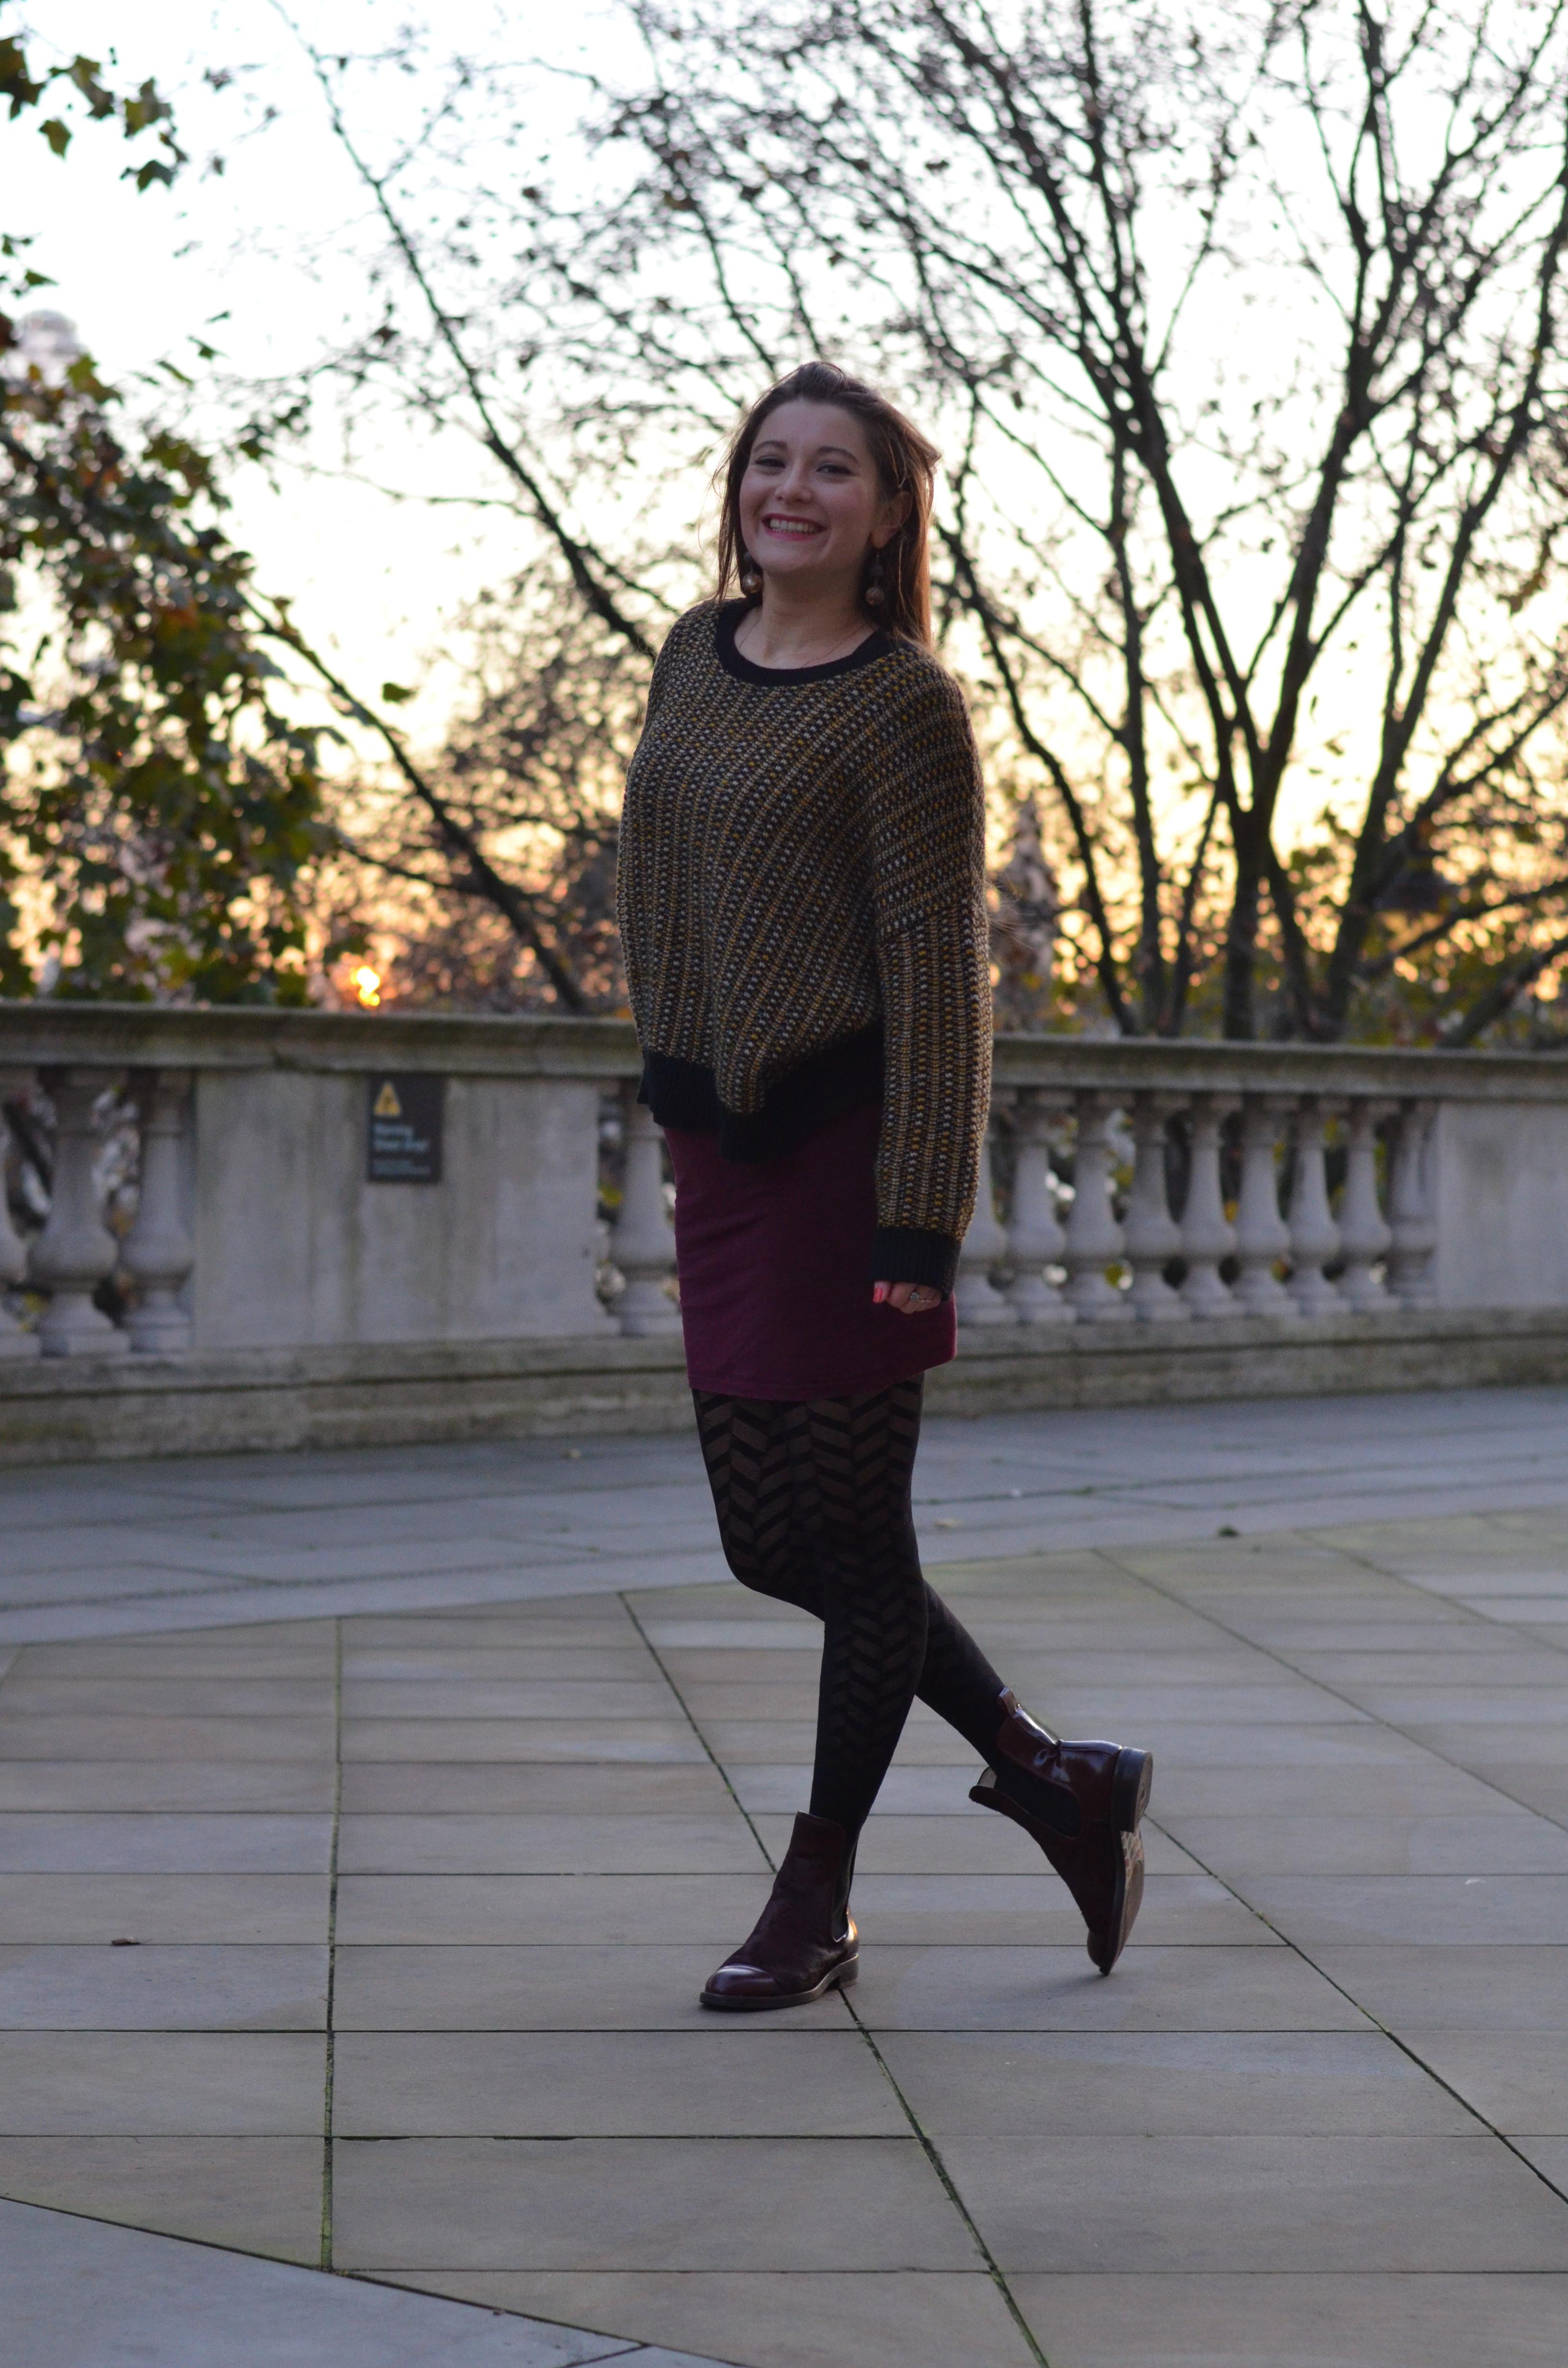 jupe-bordeaux-primark-pull-urban-outfitters-boots-clarks-orla-kiely